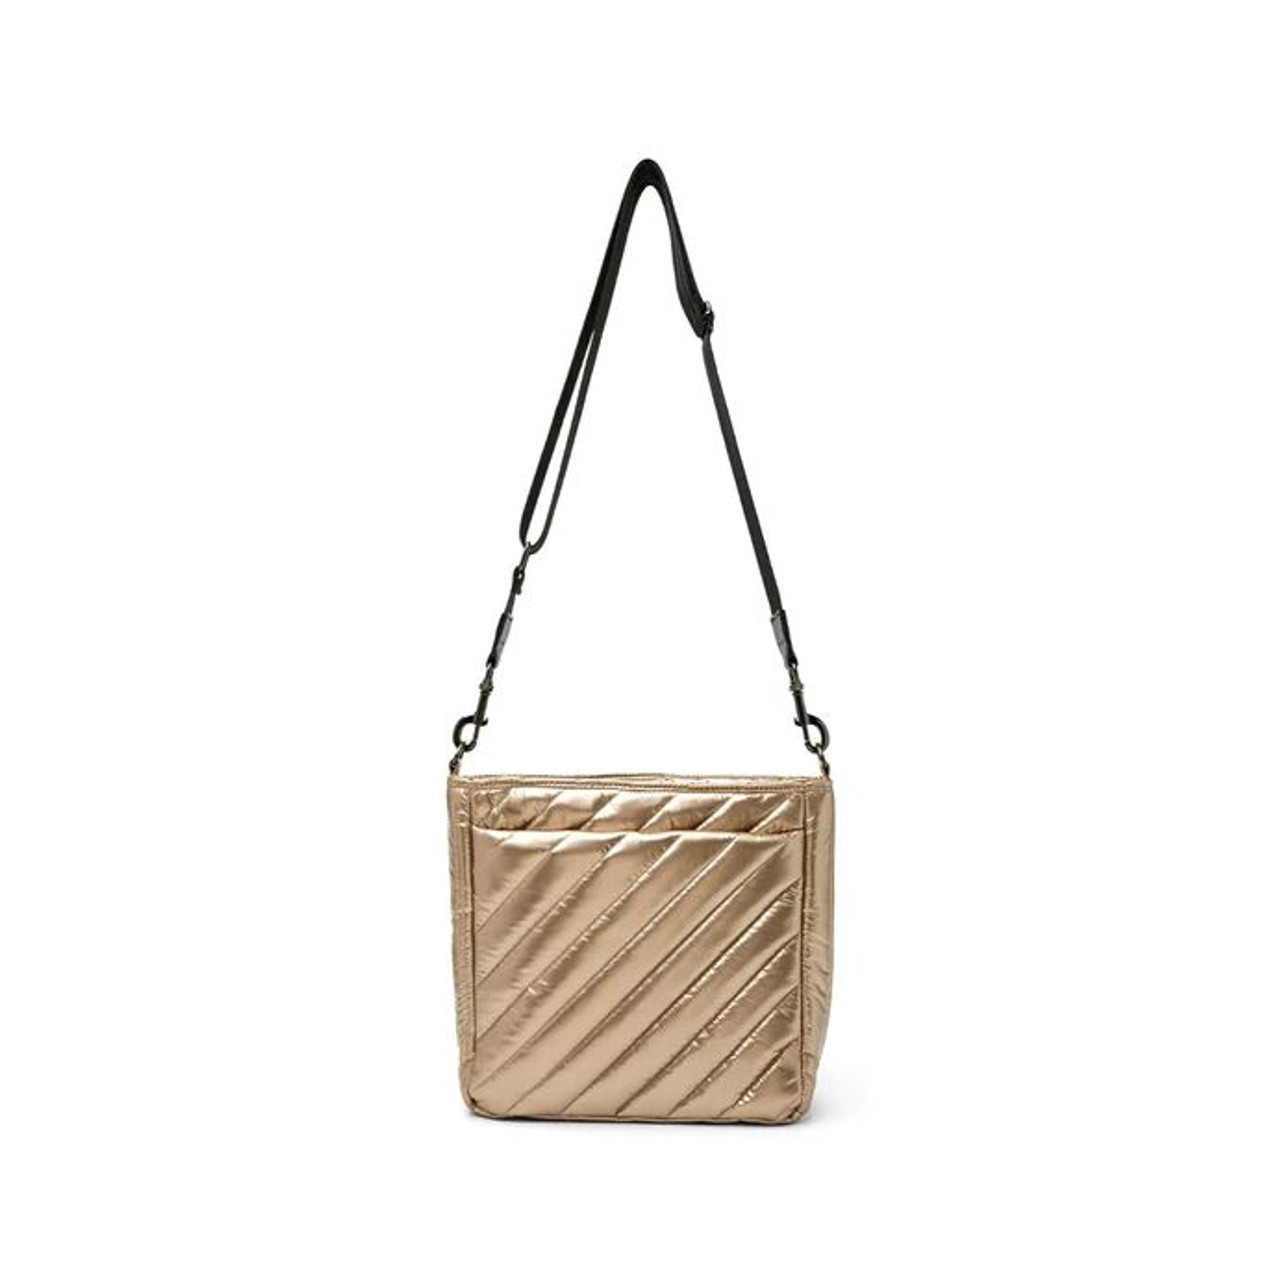 THINK ROYLN, Bags, New Think Royln Cloud Bag In Pearl Cashmere